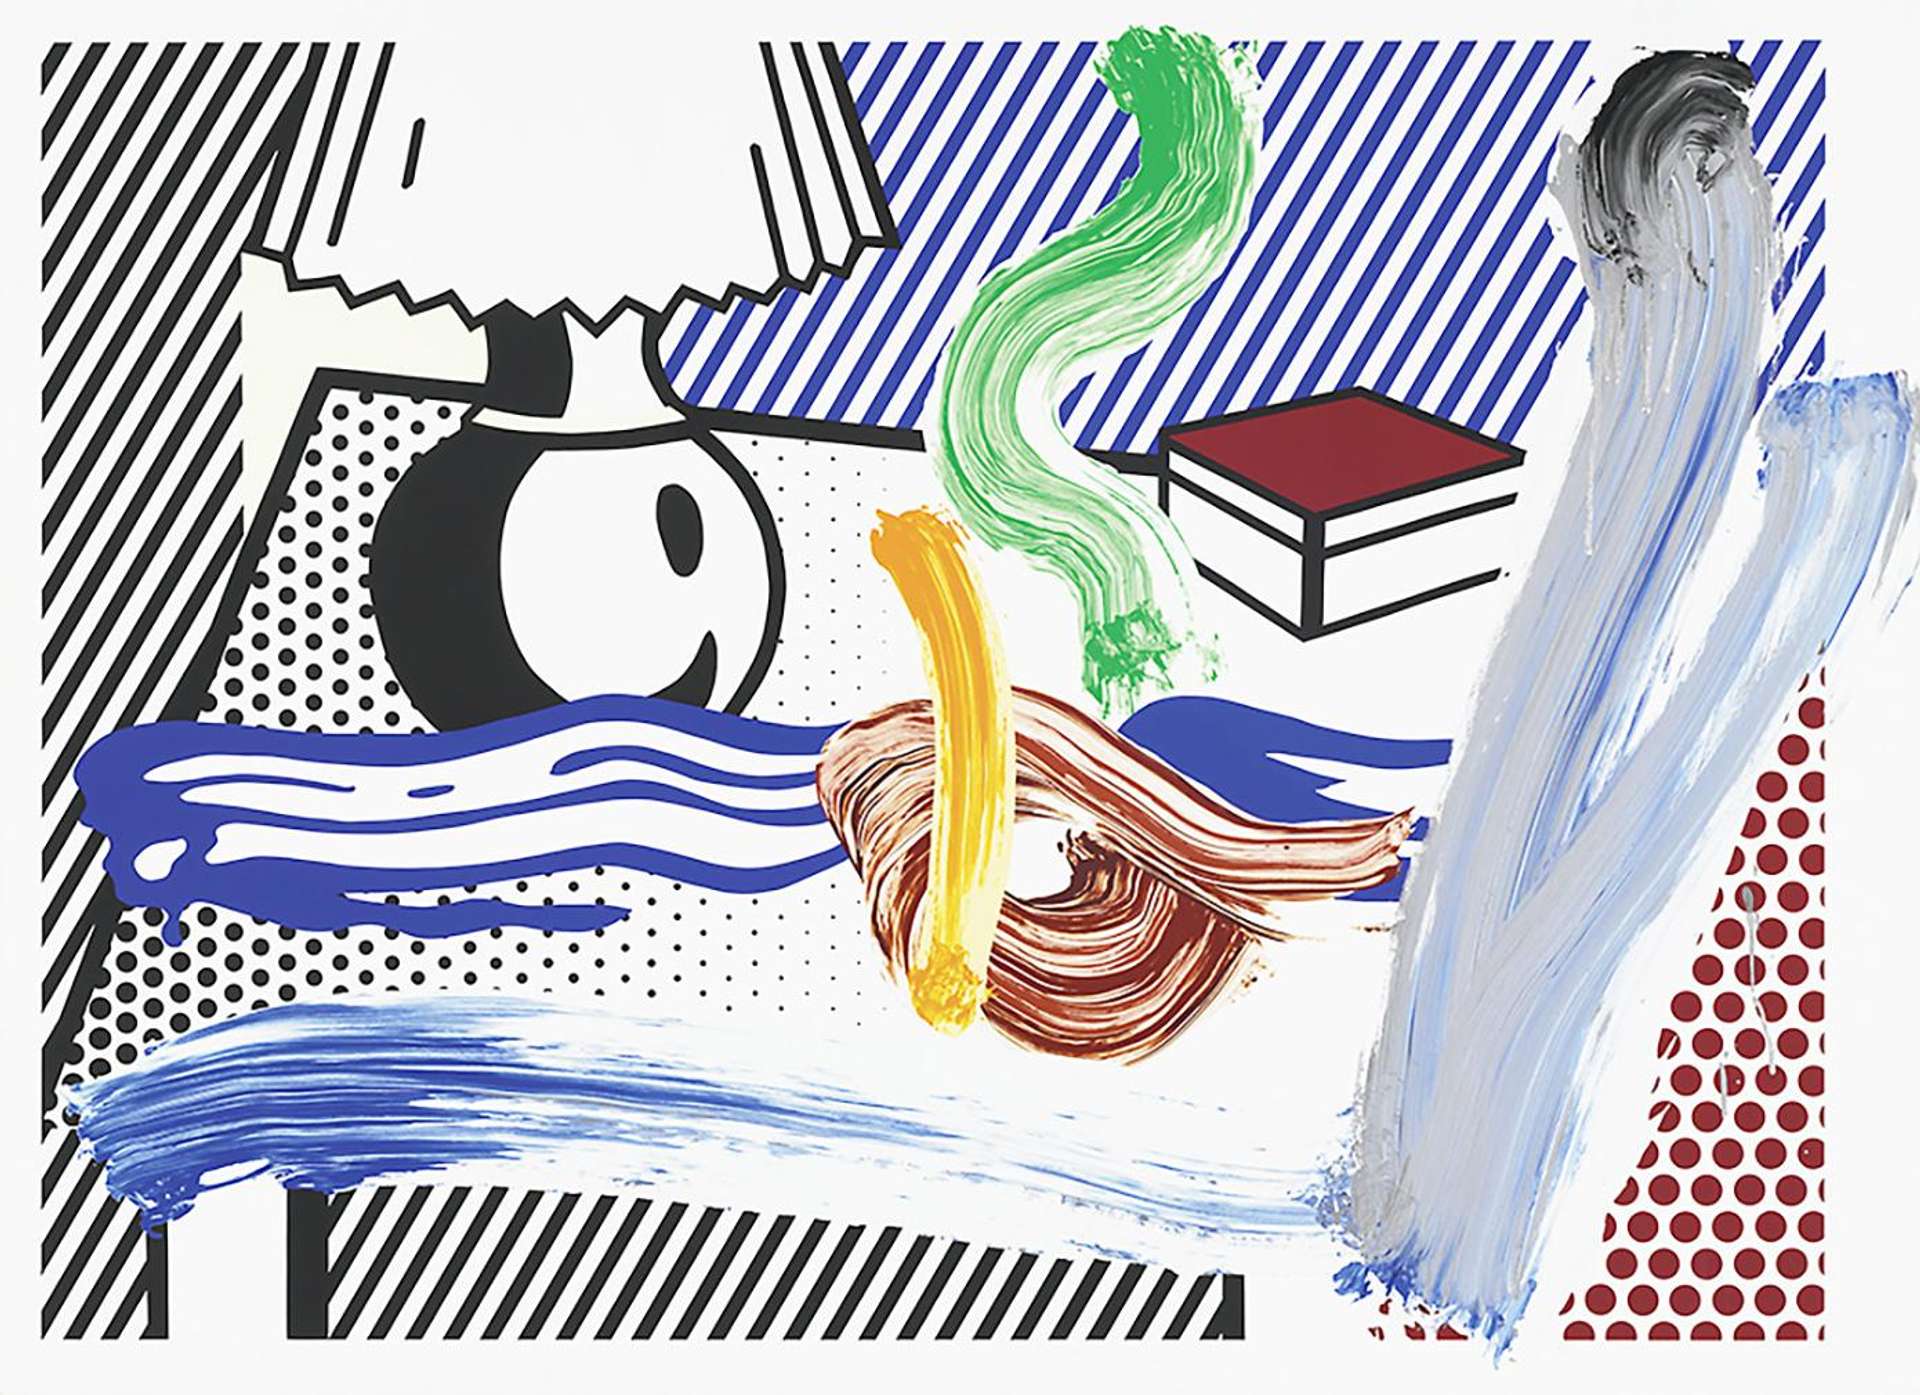 A screeprint by Roy Lichtenstein depicting a lamp and box on a table, with illusory brushstrokes printed onto the composition in various colours